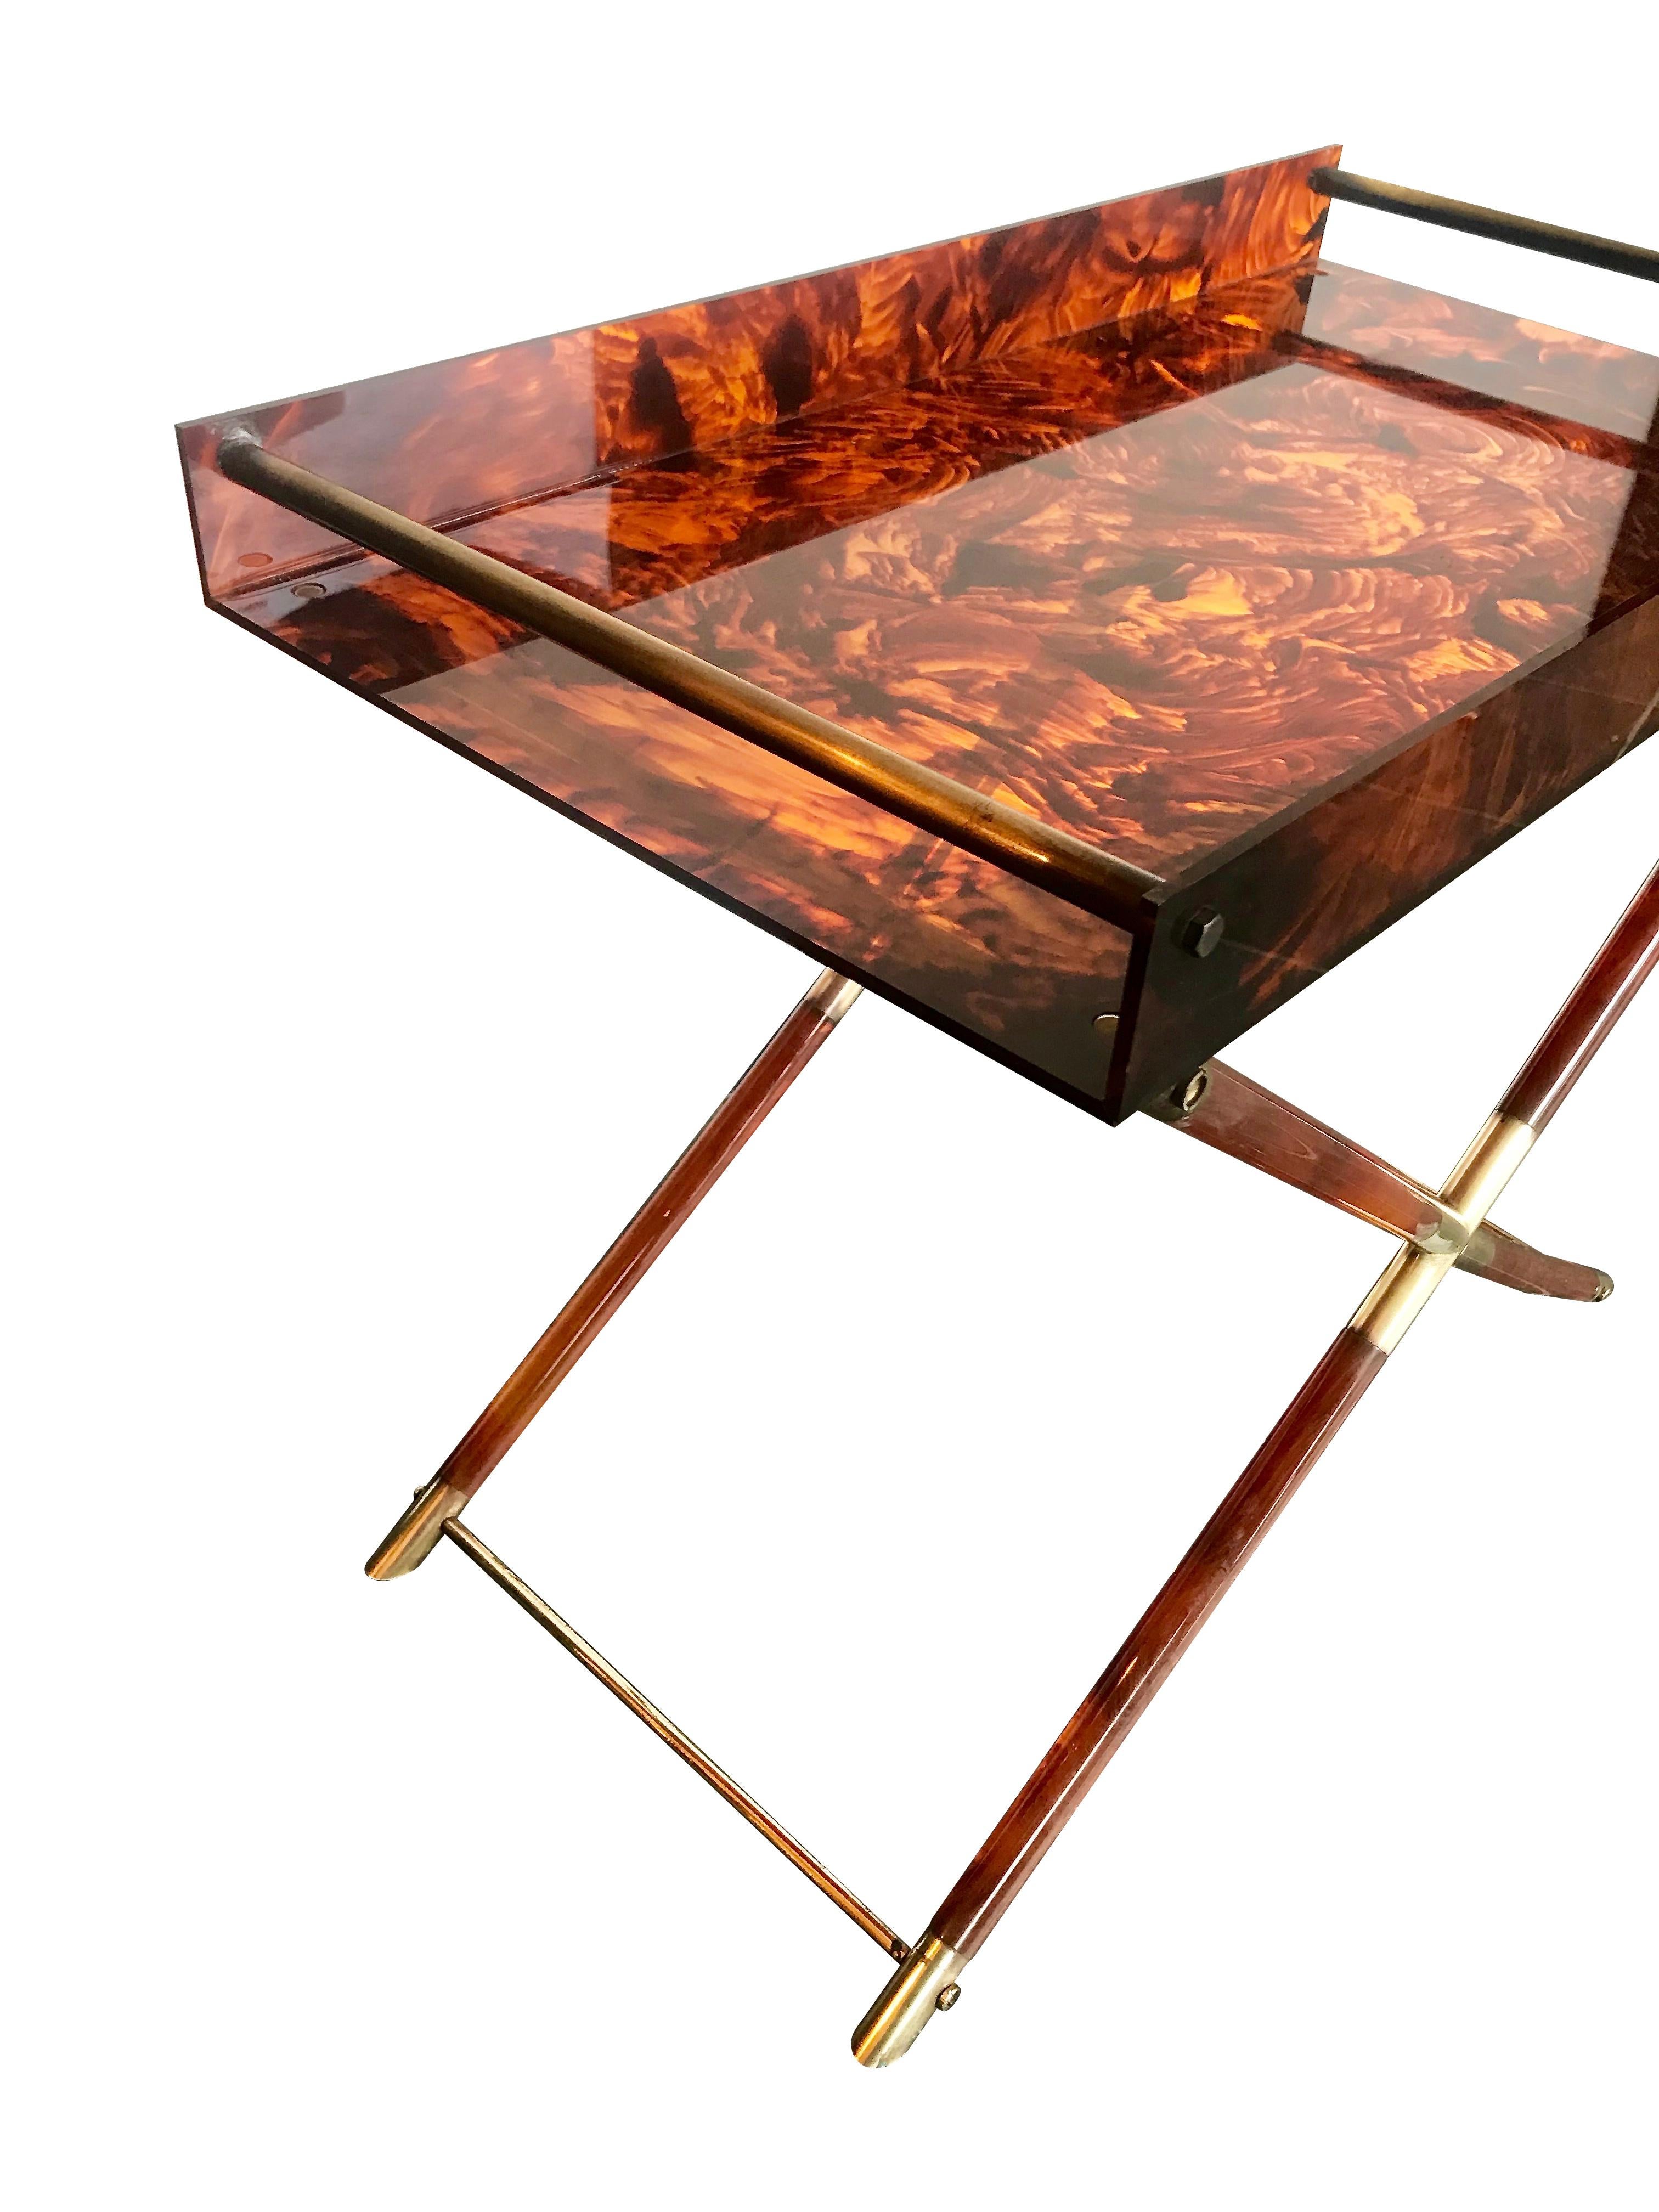 Faux Tortoiseshell Side Table with Brass Detailing (Ende des 20. Jahrhunderts)